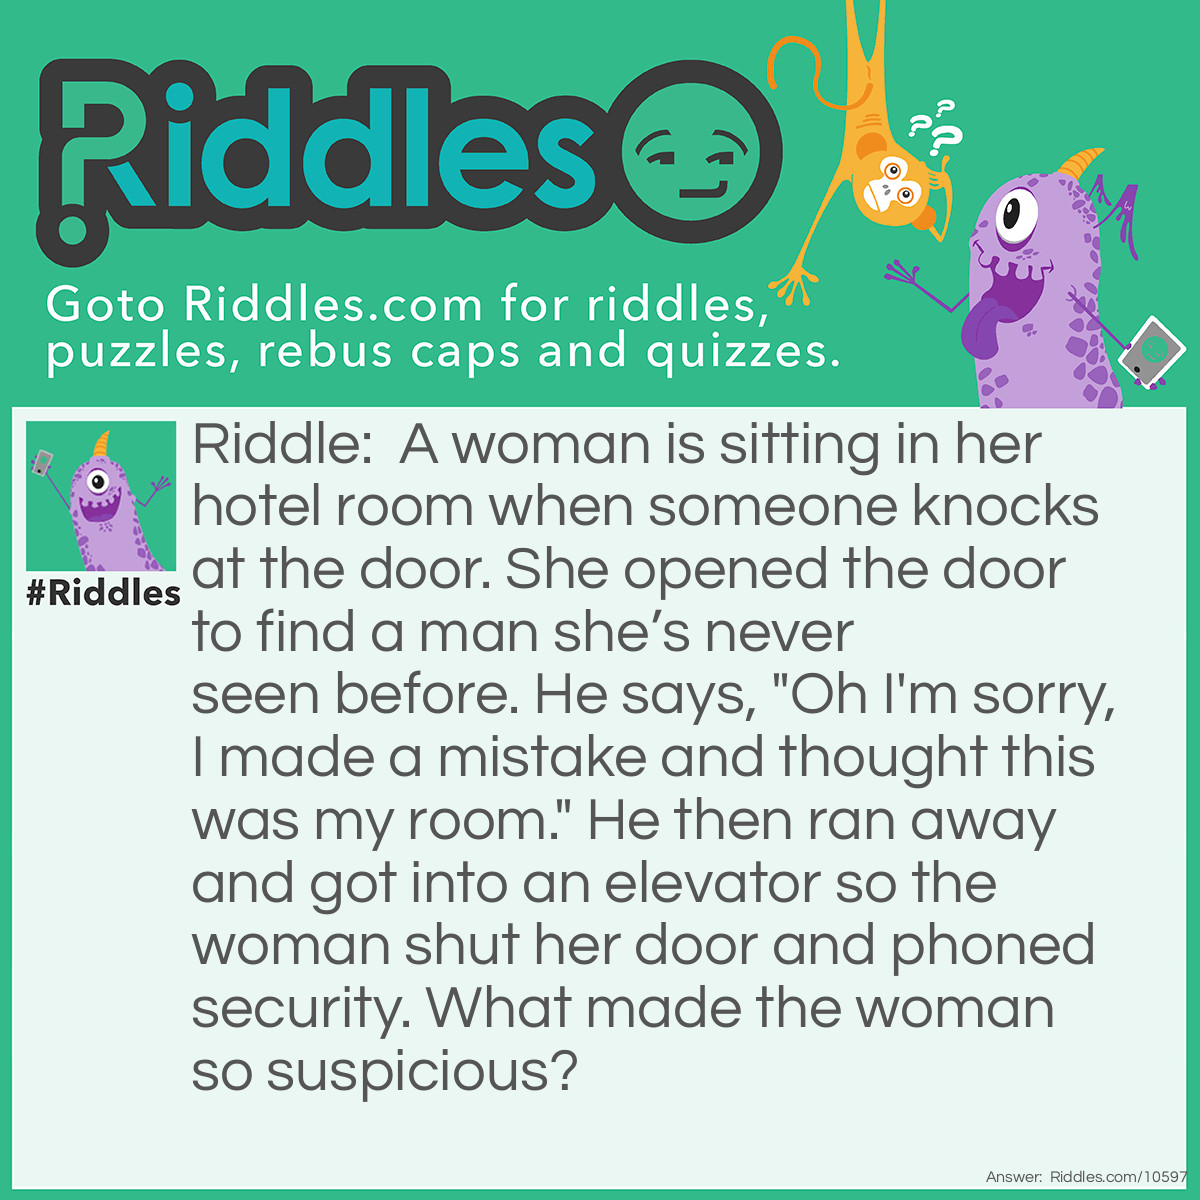 Riddle: A woman is sitting in her hotel room when someone knocks at the door. She opened the door to find a man she’s never seen before. He says, "Oh I'm sorry, I made a mistake and thought this was my room." He then ran away and got into an elevator so the woman shut her door and phoned security. What made the woman so suspicious? Answer: You don’t knock on your own hotel room door.